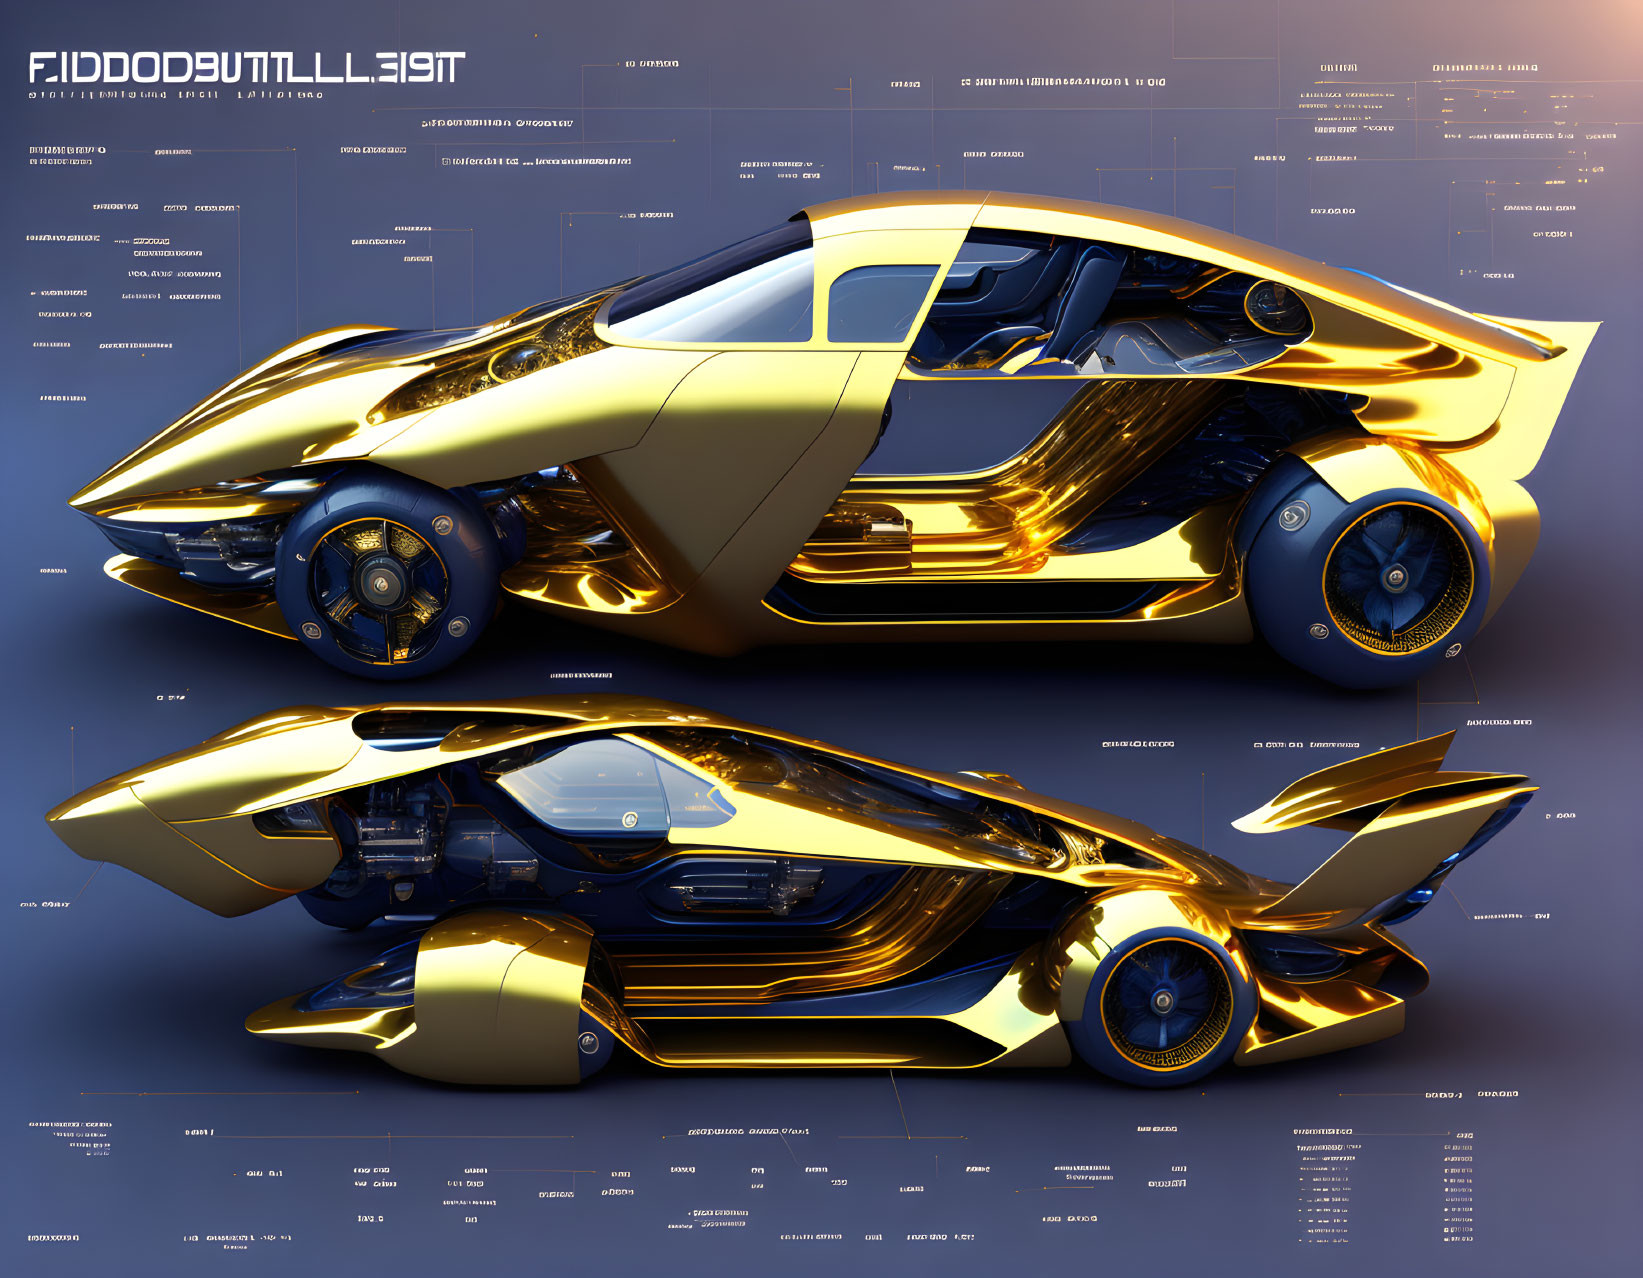 Golden futuristic concept car on blueprint-style background with annotations